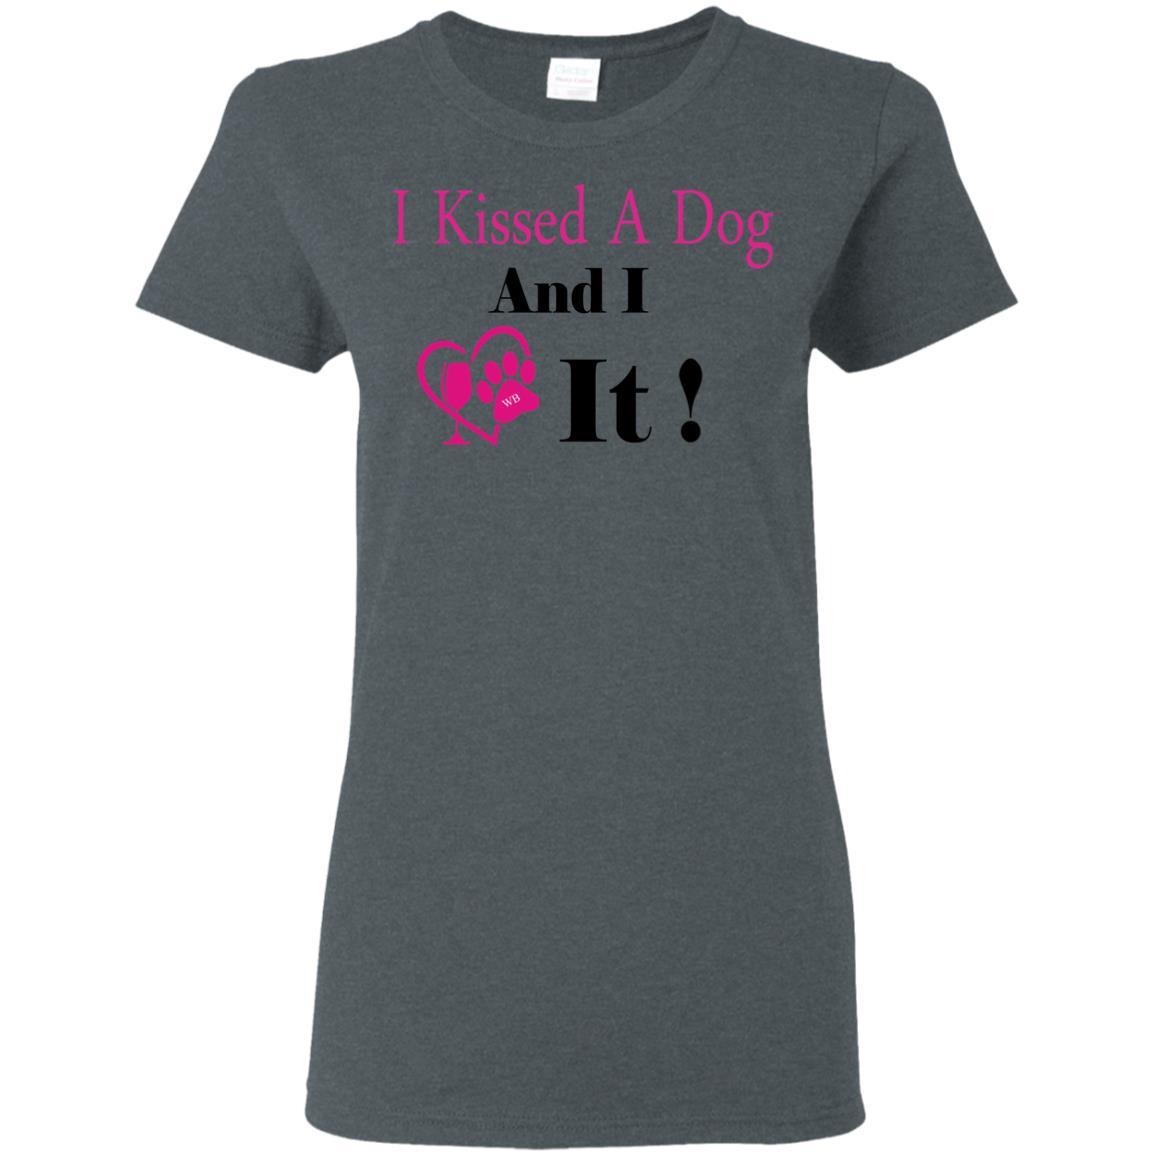 T-Shirts Dark Heather / S WineyBitches.co "I Kissed A Dog And I Loved It:" Ladies' 5.3 oz. T-Shirt WineyBitchesCo